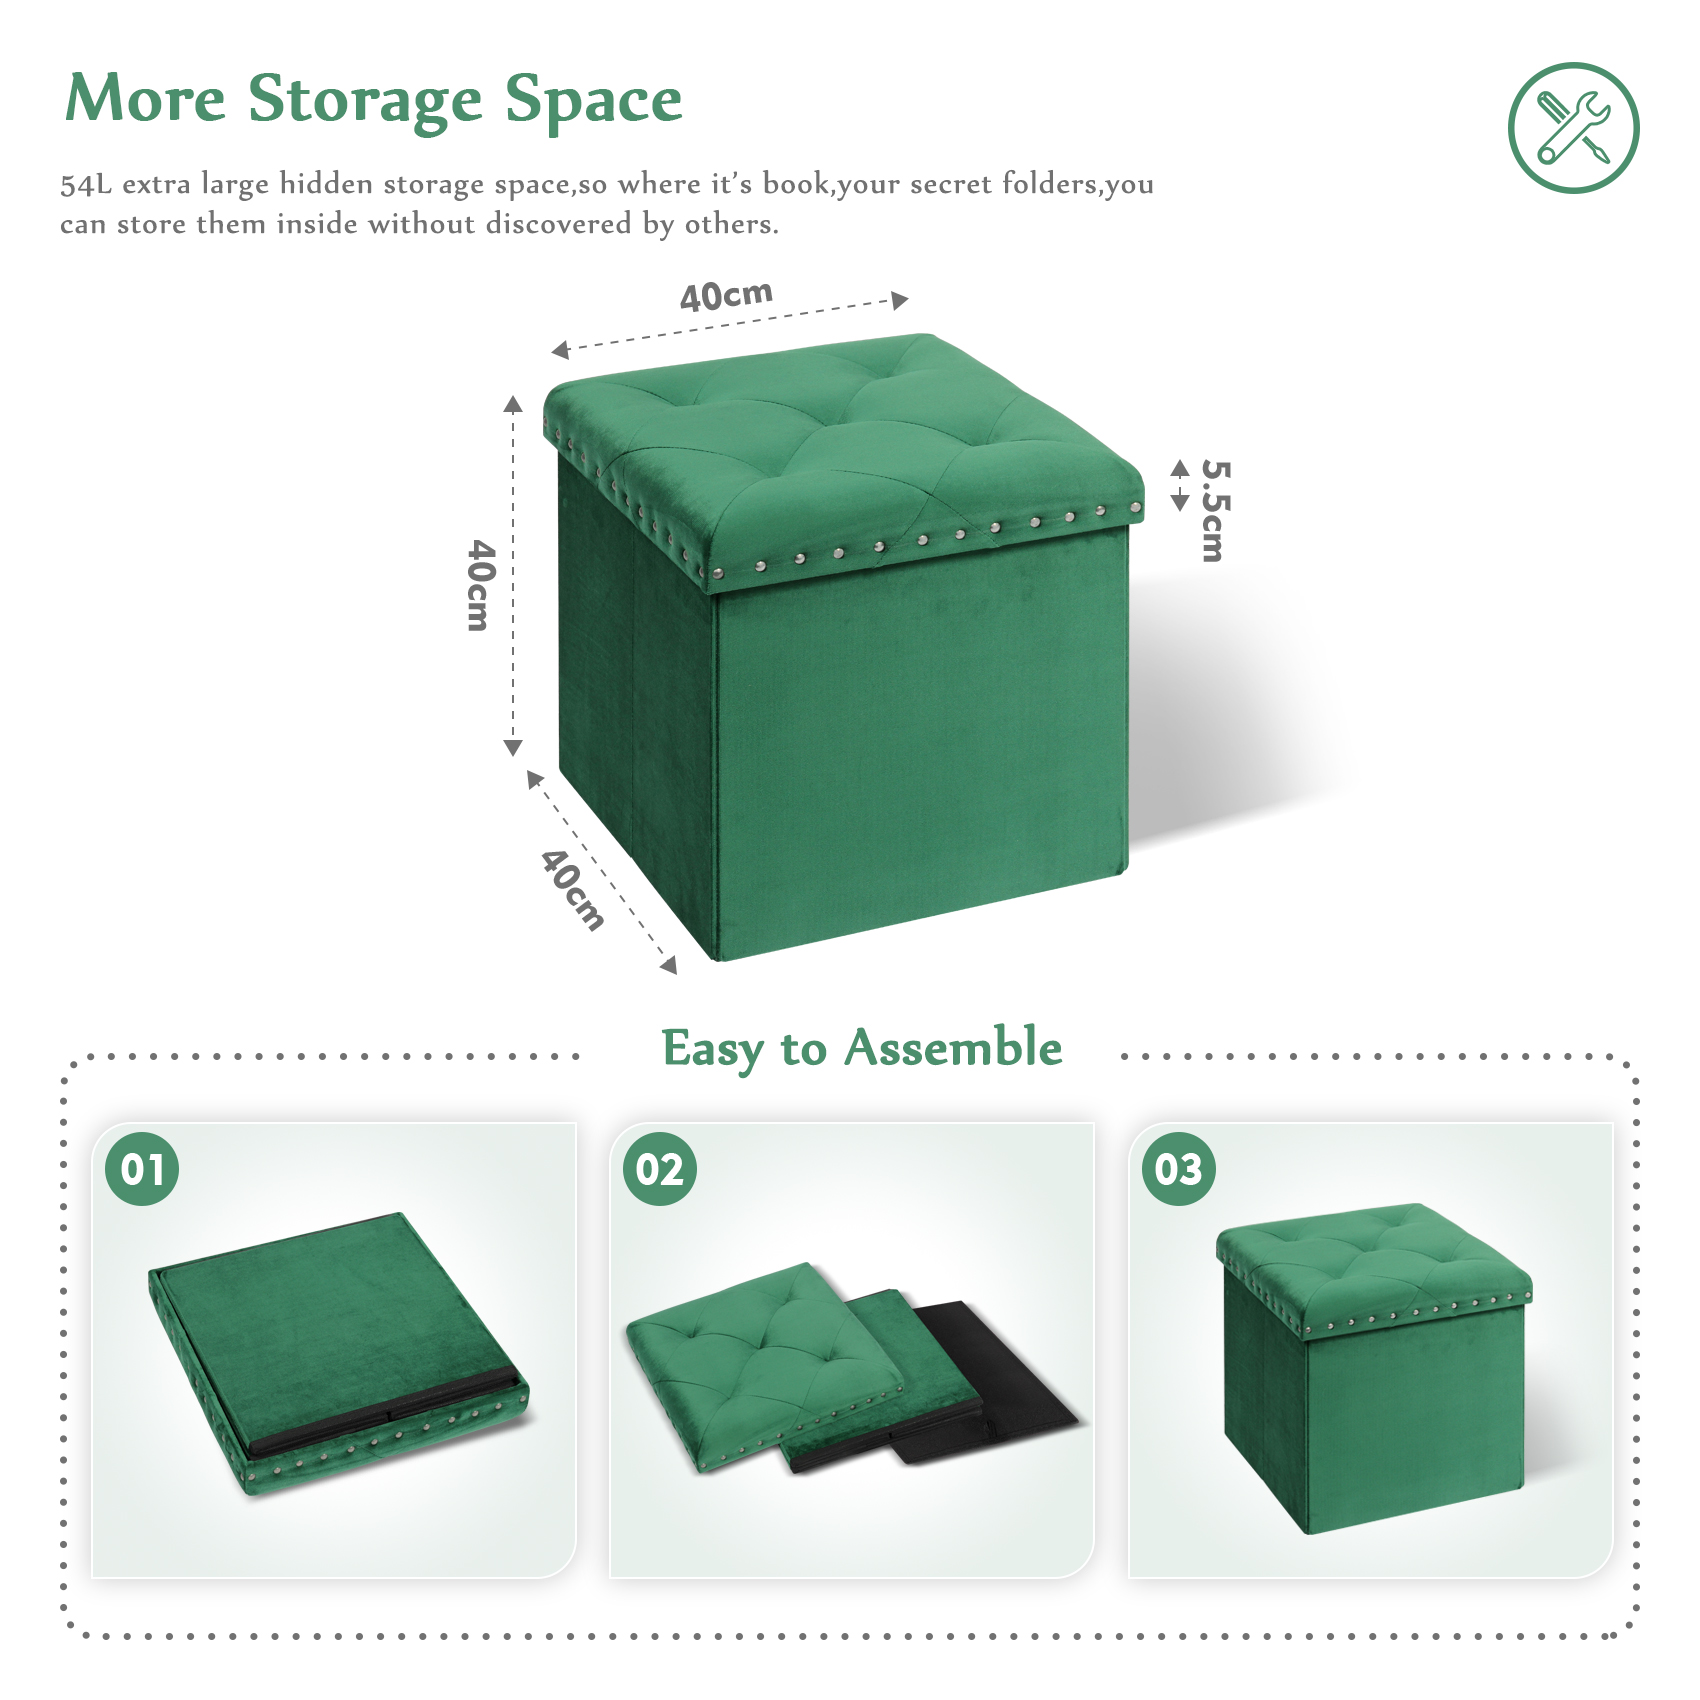 PINPLUS 15.7" Green Velvet Folding Storage Ottoman Cube, Small Foot Rest Stool, Window Seat for Living Room, Toy Chest Box with Rivet Tray - image 2 of 5